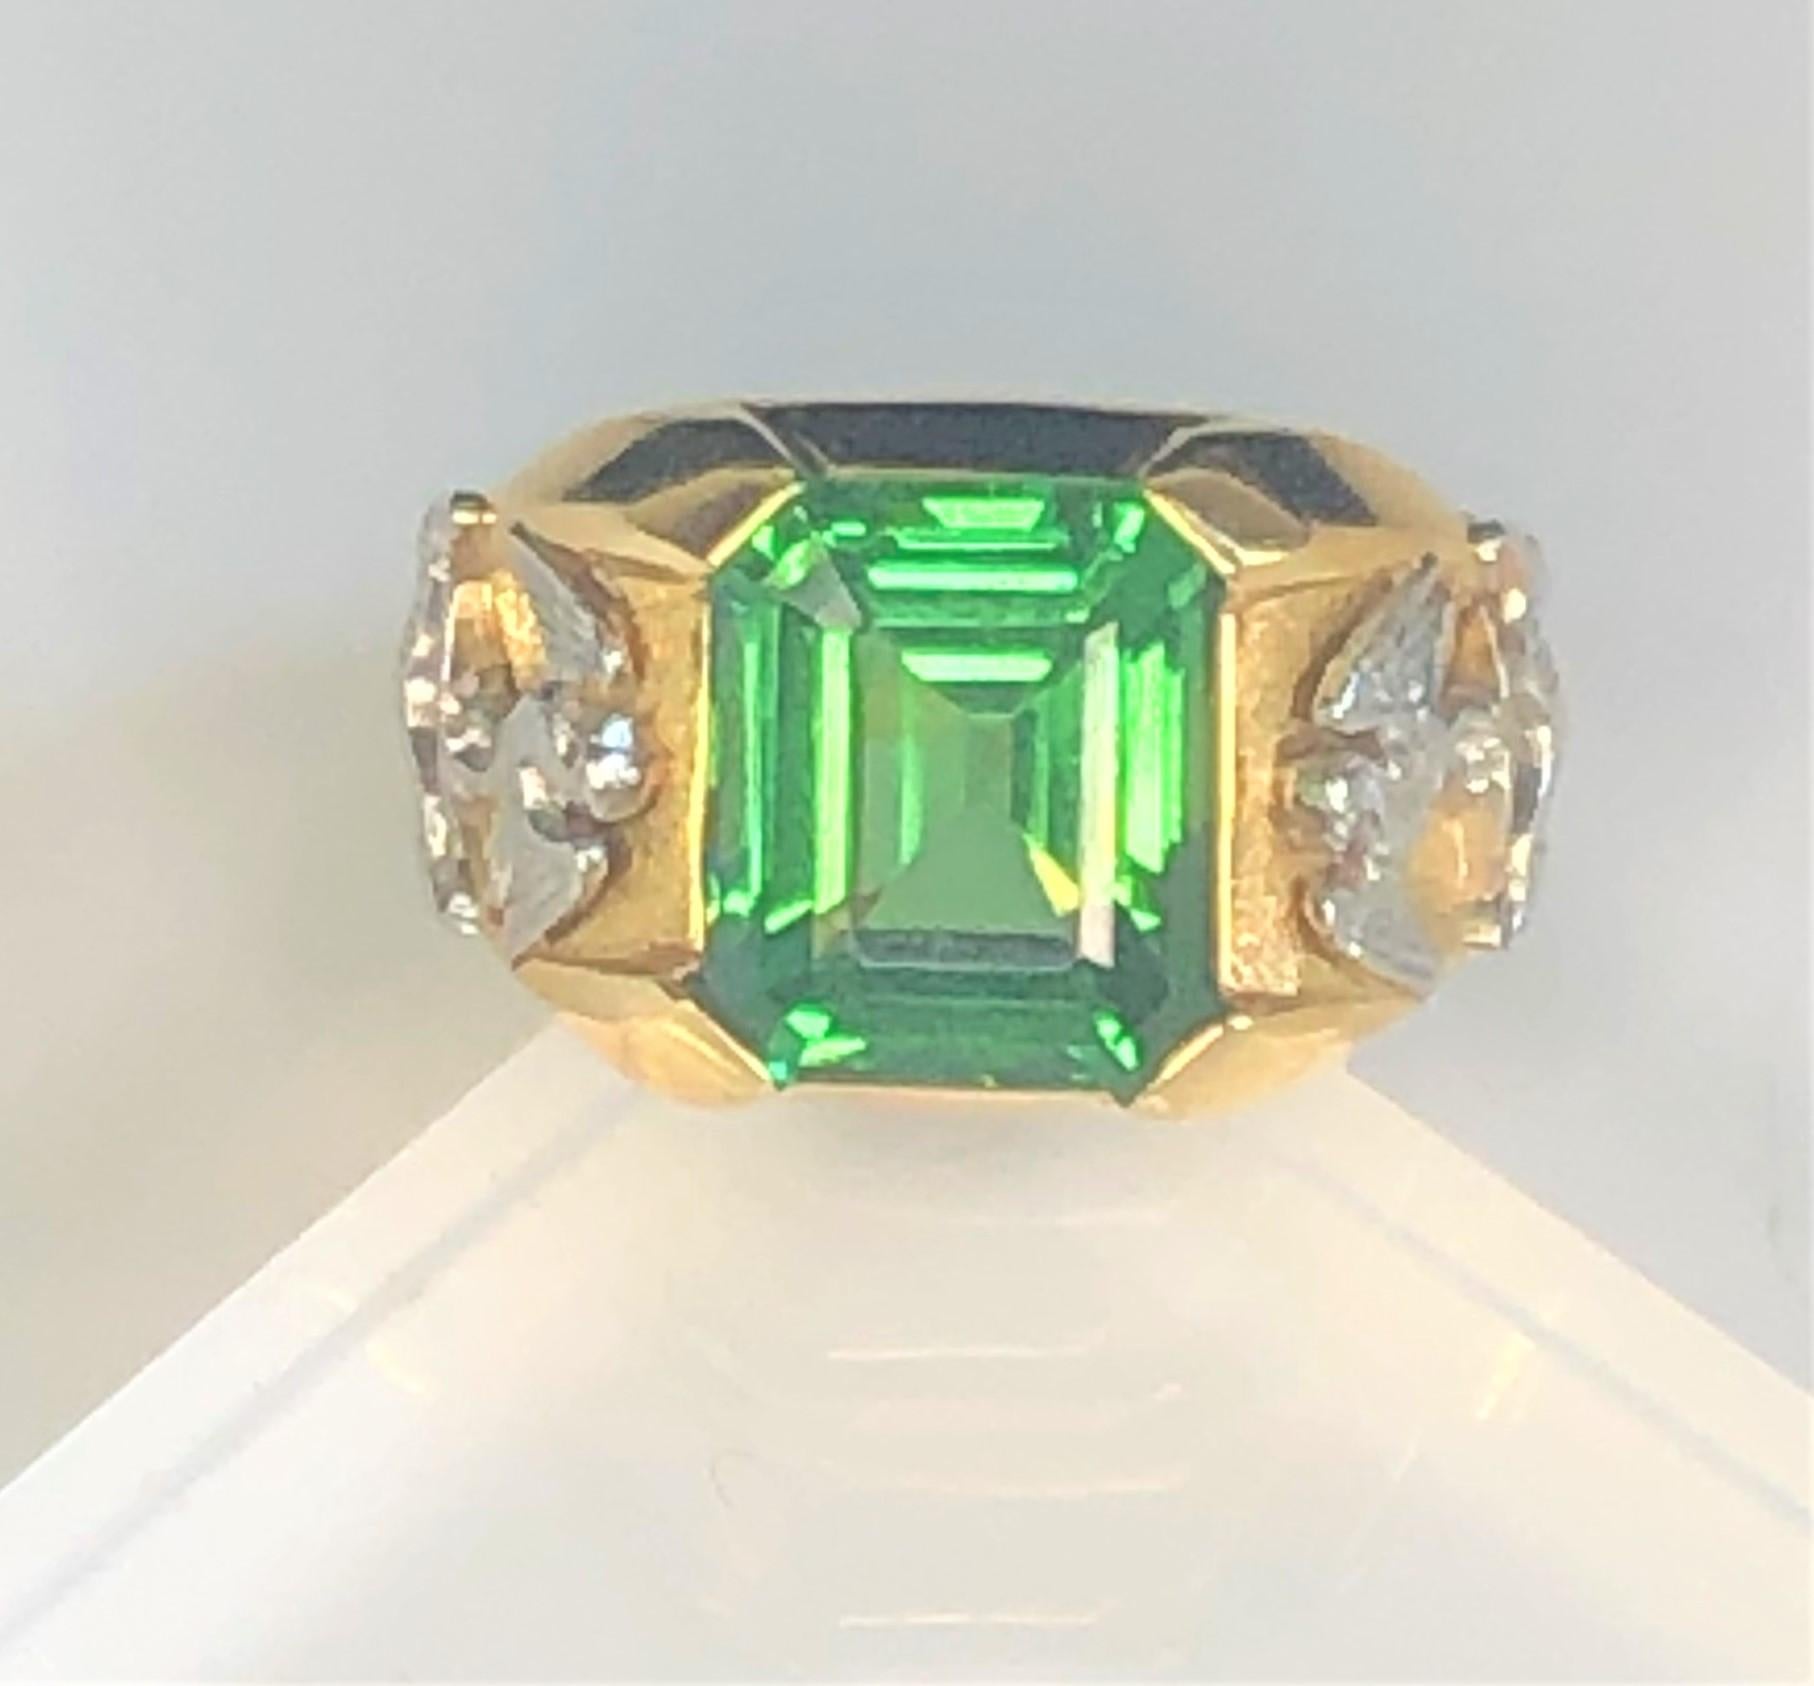 By designer Julius Cohen, this high quality ring is a must have!  Stunning color!
18 karat yellow and white gold mounting
Emerald cut green tsavorite garnet, approximately 6.9 carats approximately 10.6mm x 12.35mm x 5.3mm.
Each shoulder has a white